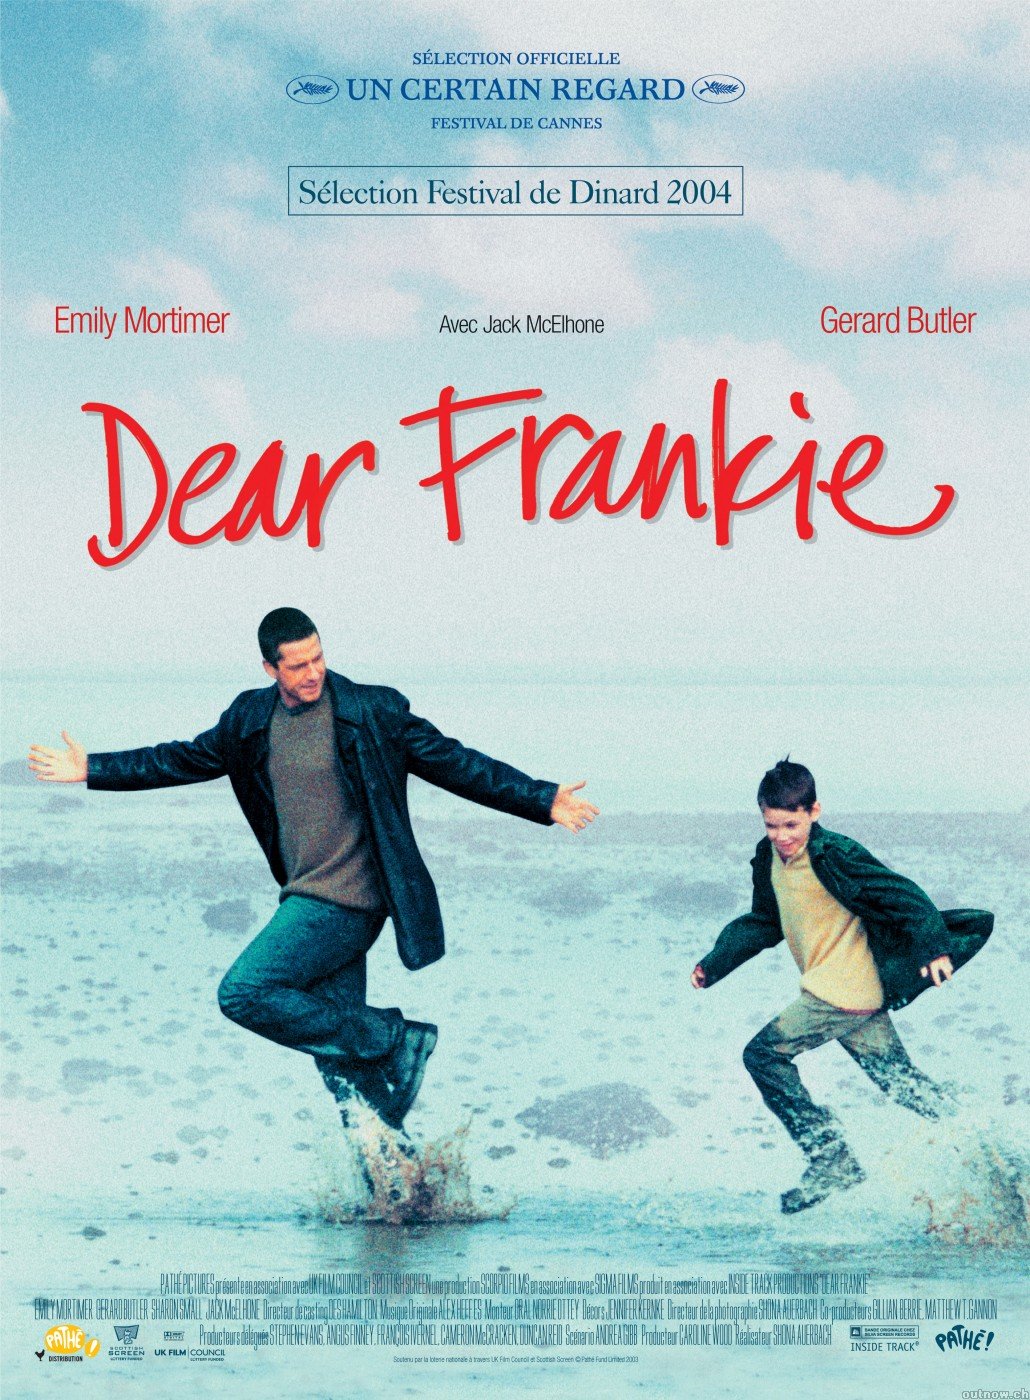 Poster of the movie Dear Frankie